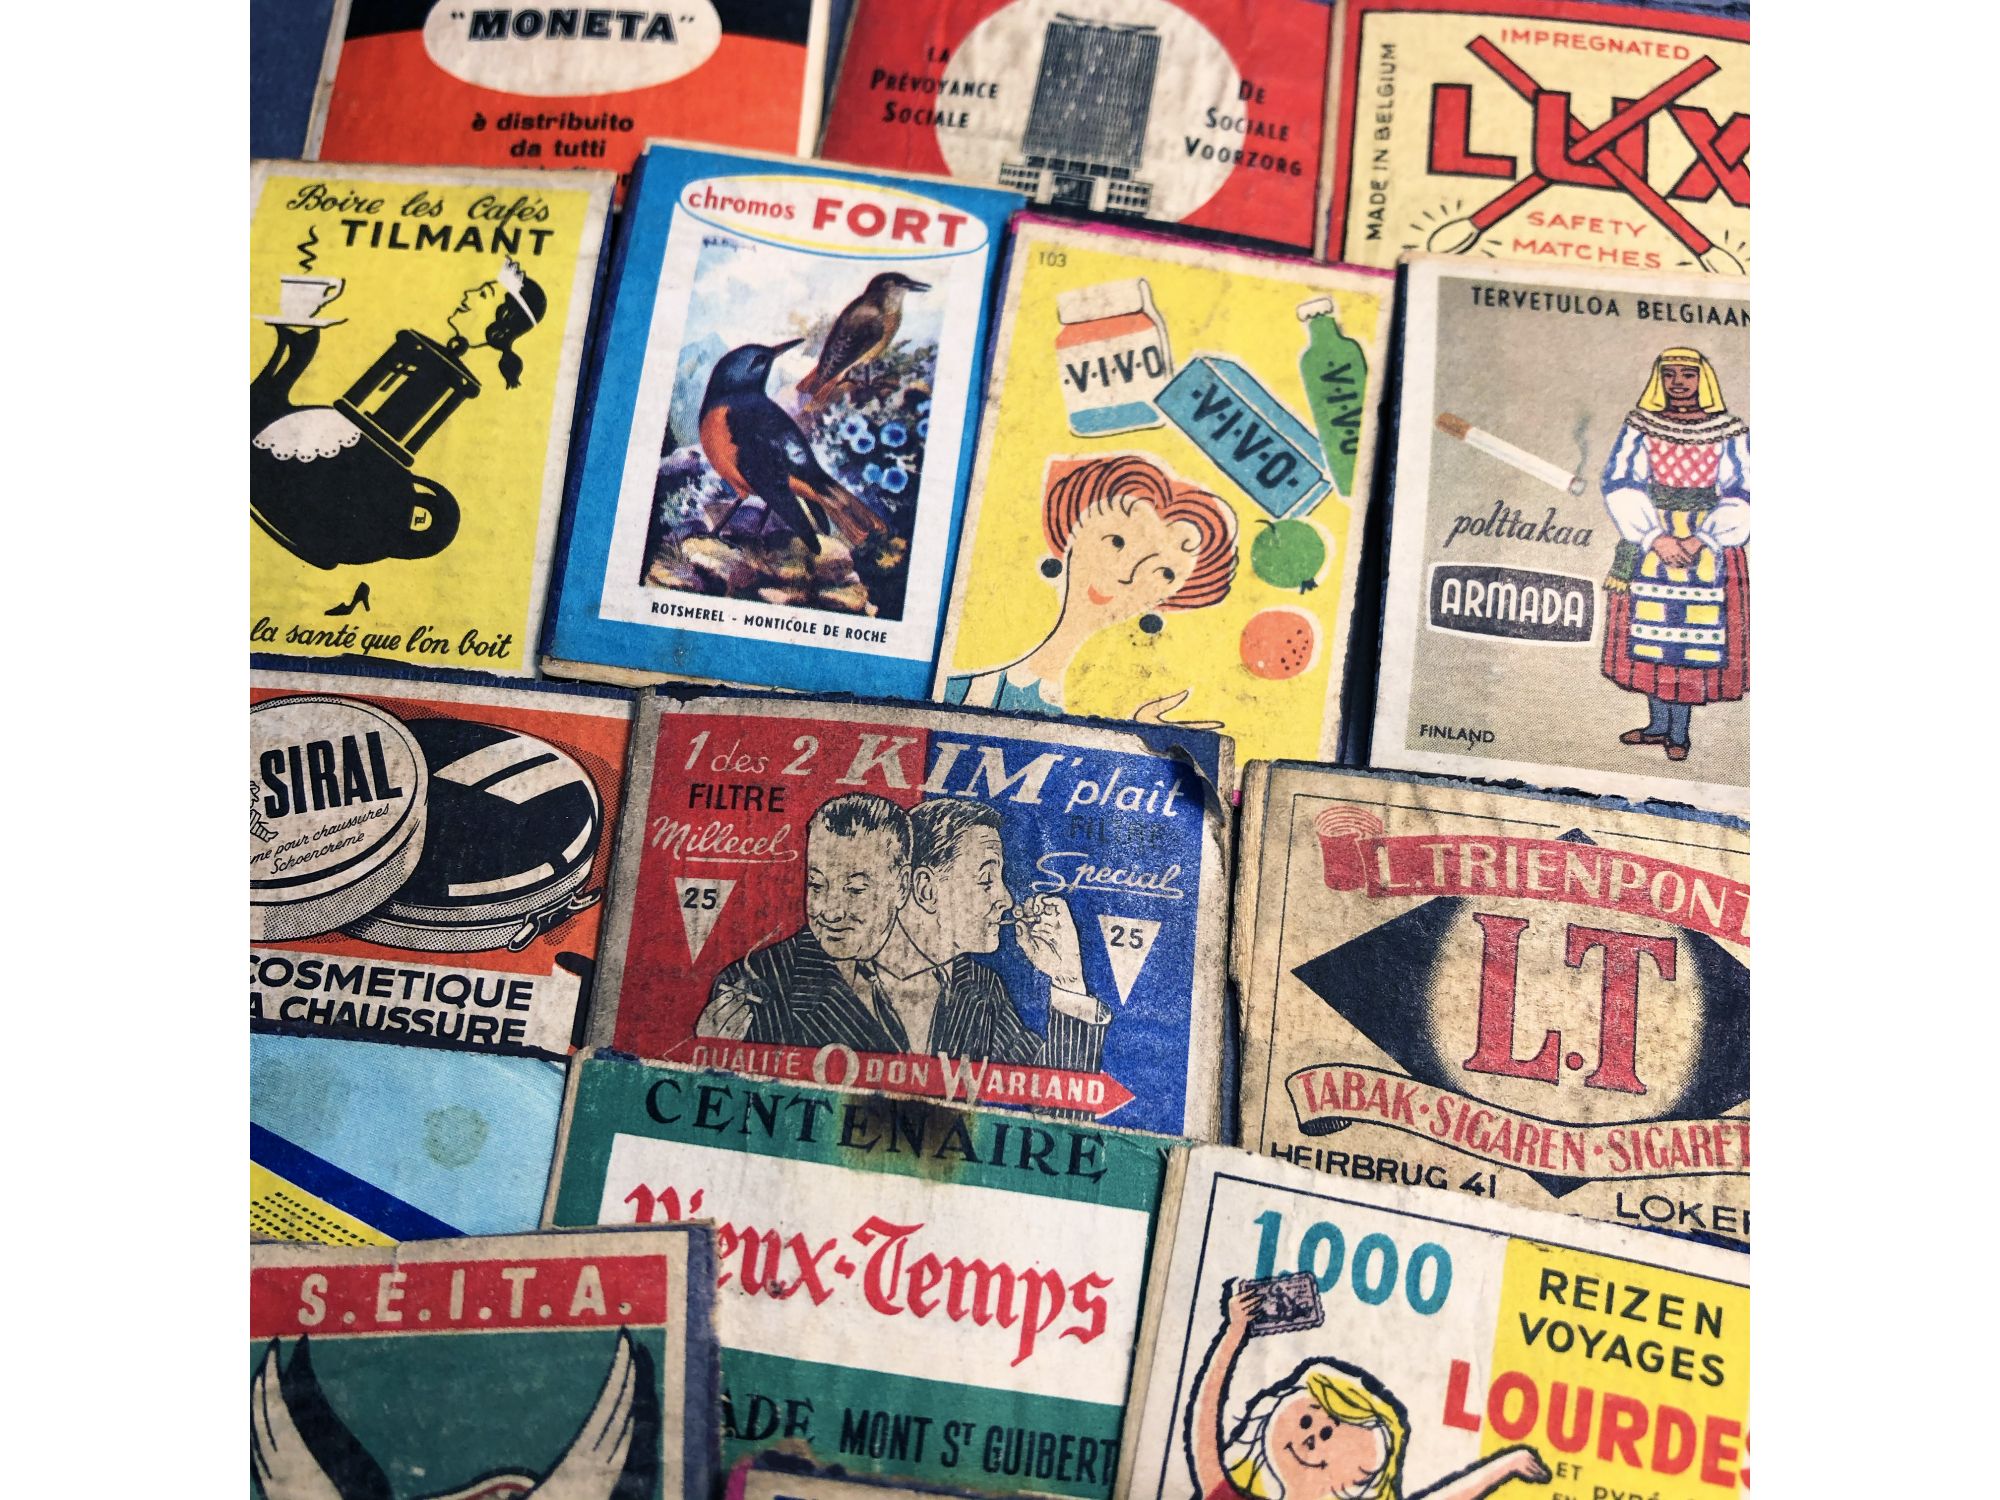 15 vintage matchbox labels - Advertising labels from 1930s to 1950s